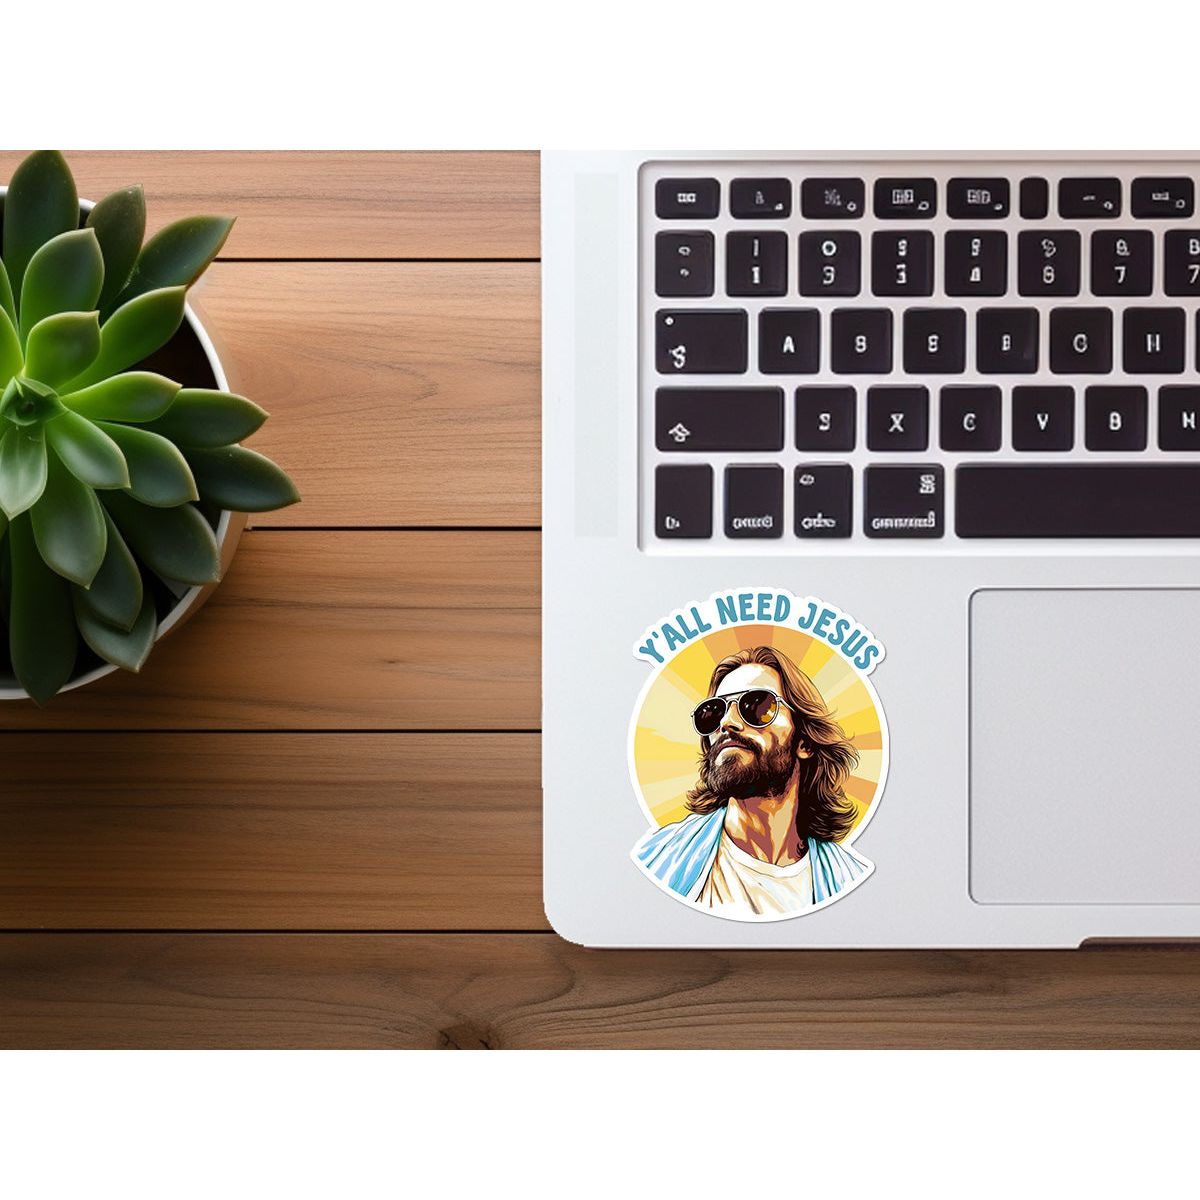 Y'all Need Jesus | Funny Christian Sticker